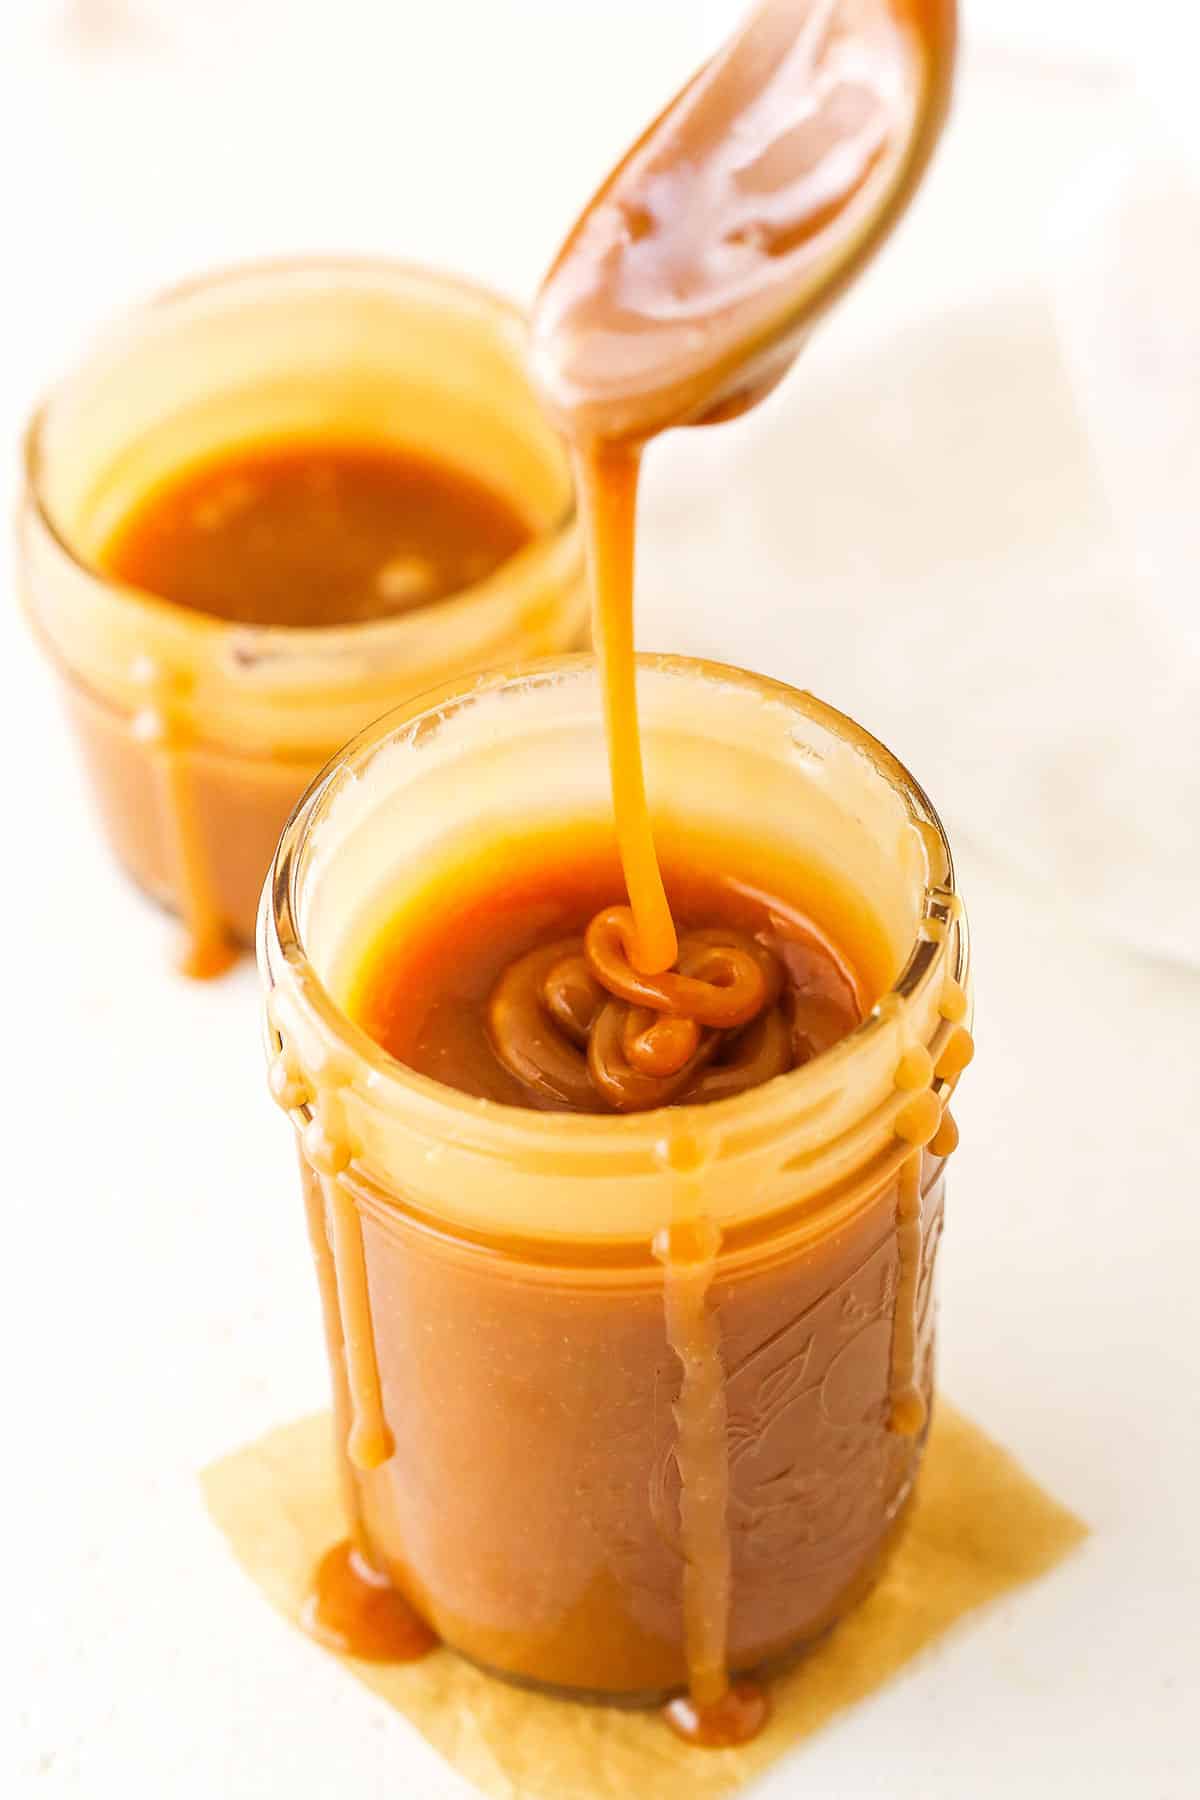 Overhead of dripping Salted Caramel Sauce off a spoon into a clear glass jar